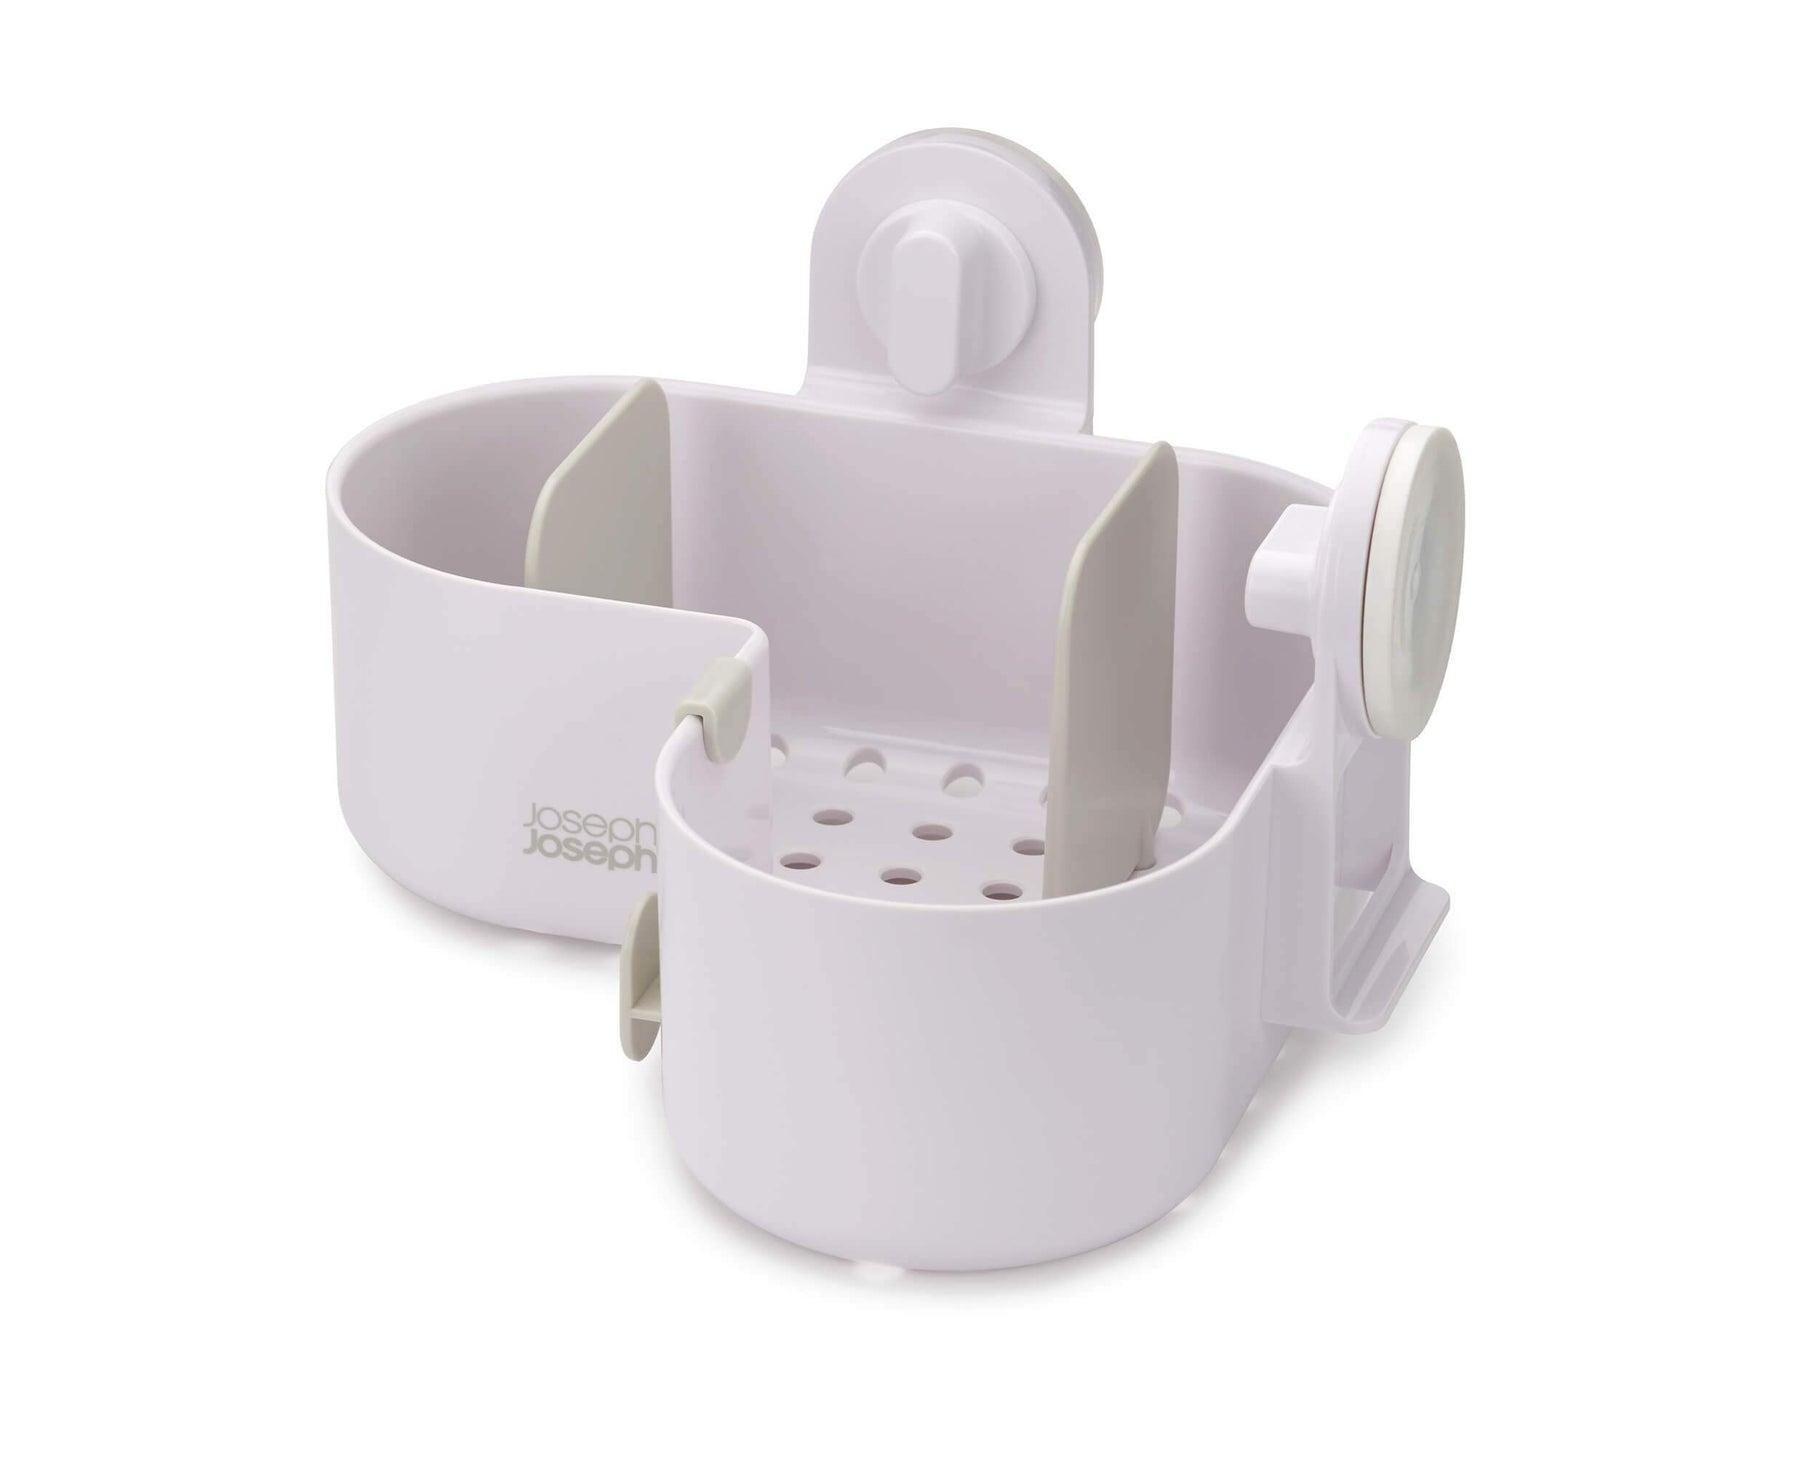 Duo Compact Shower Caddy - White background- Duo Corner Shower Caddy -image 2